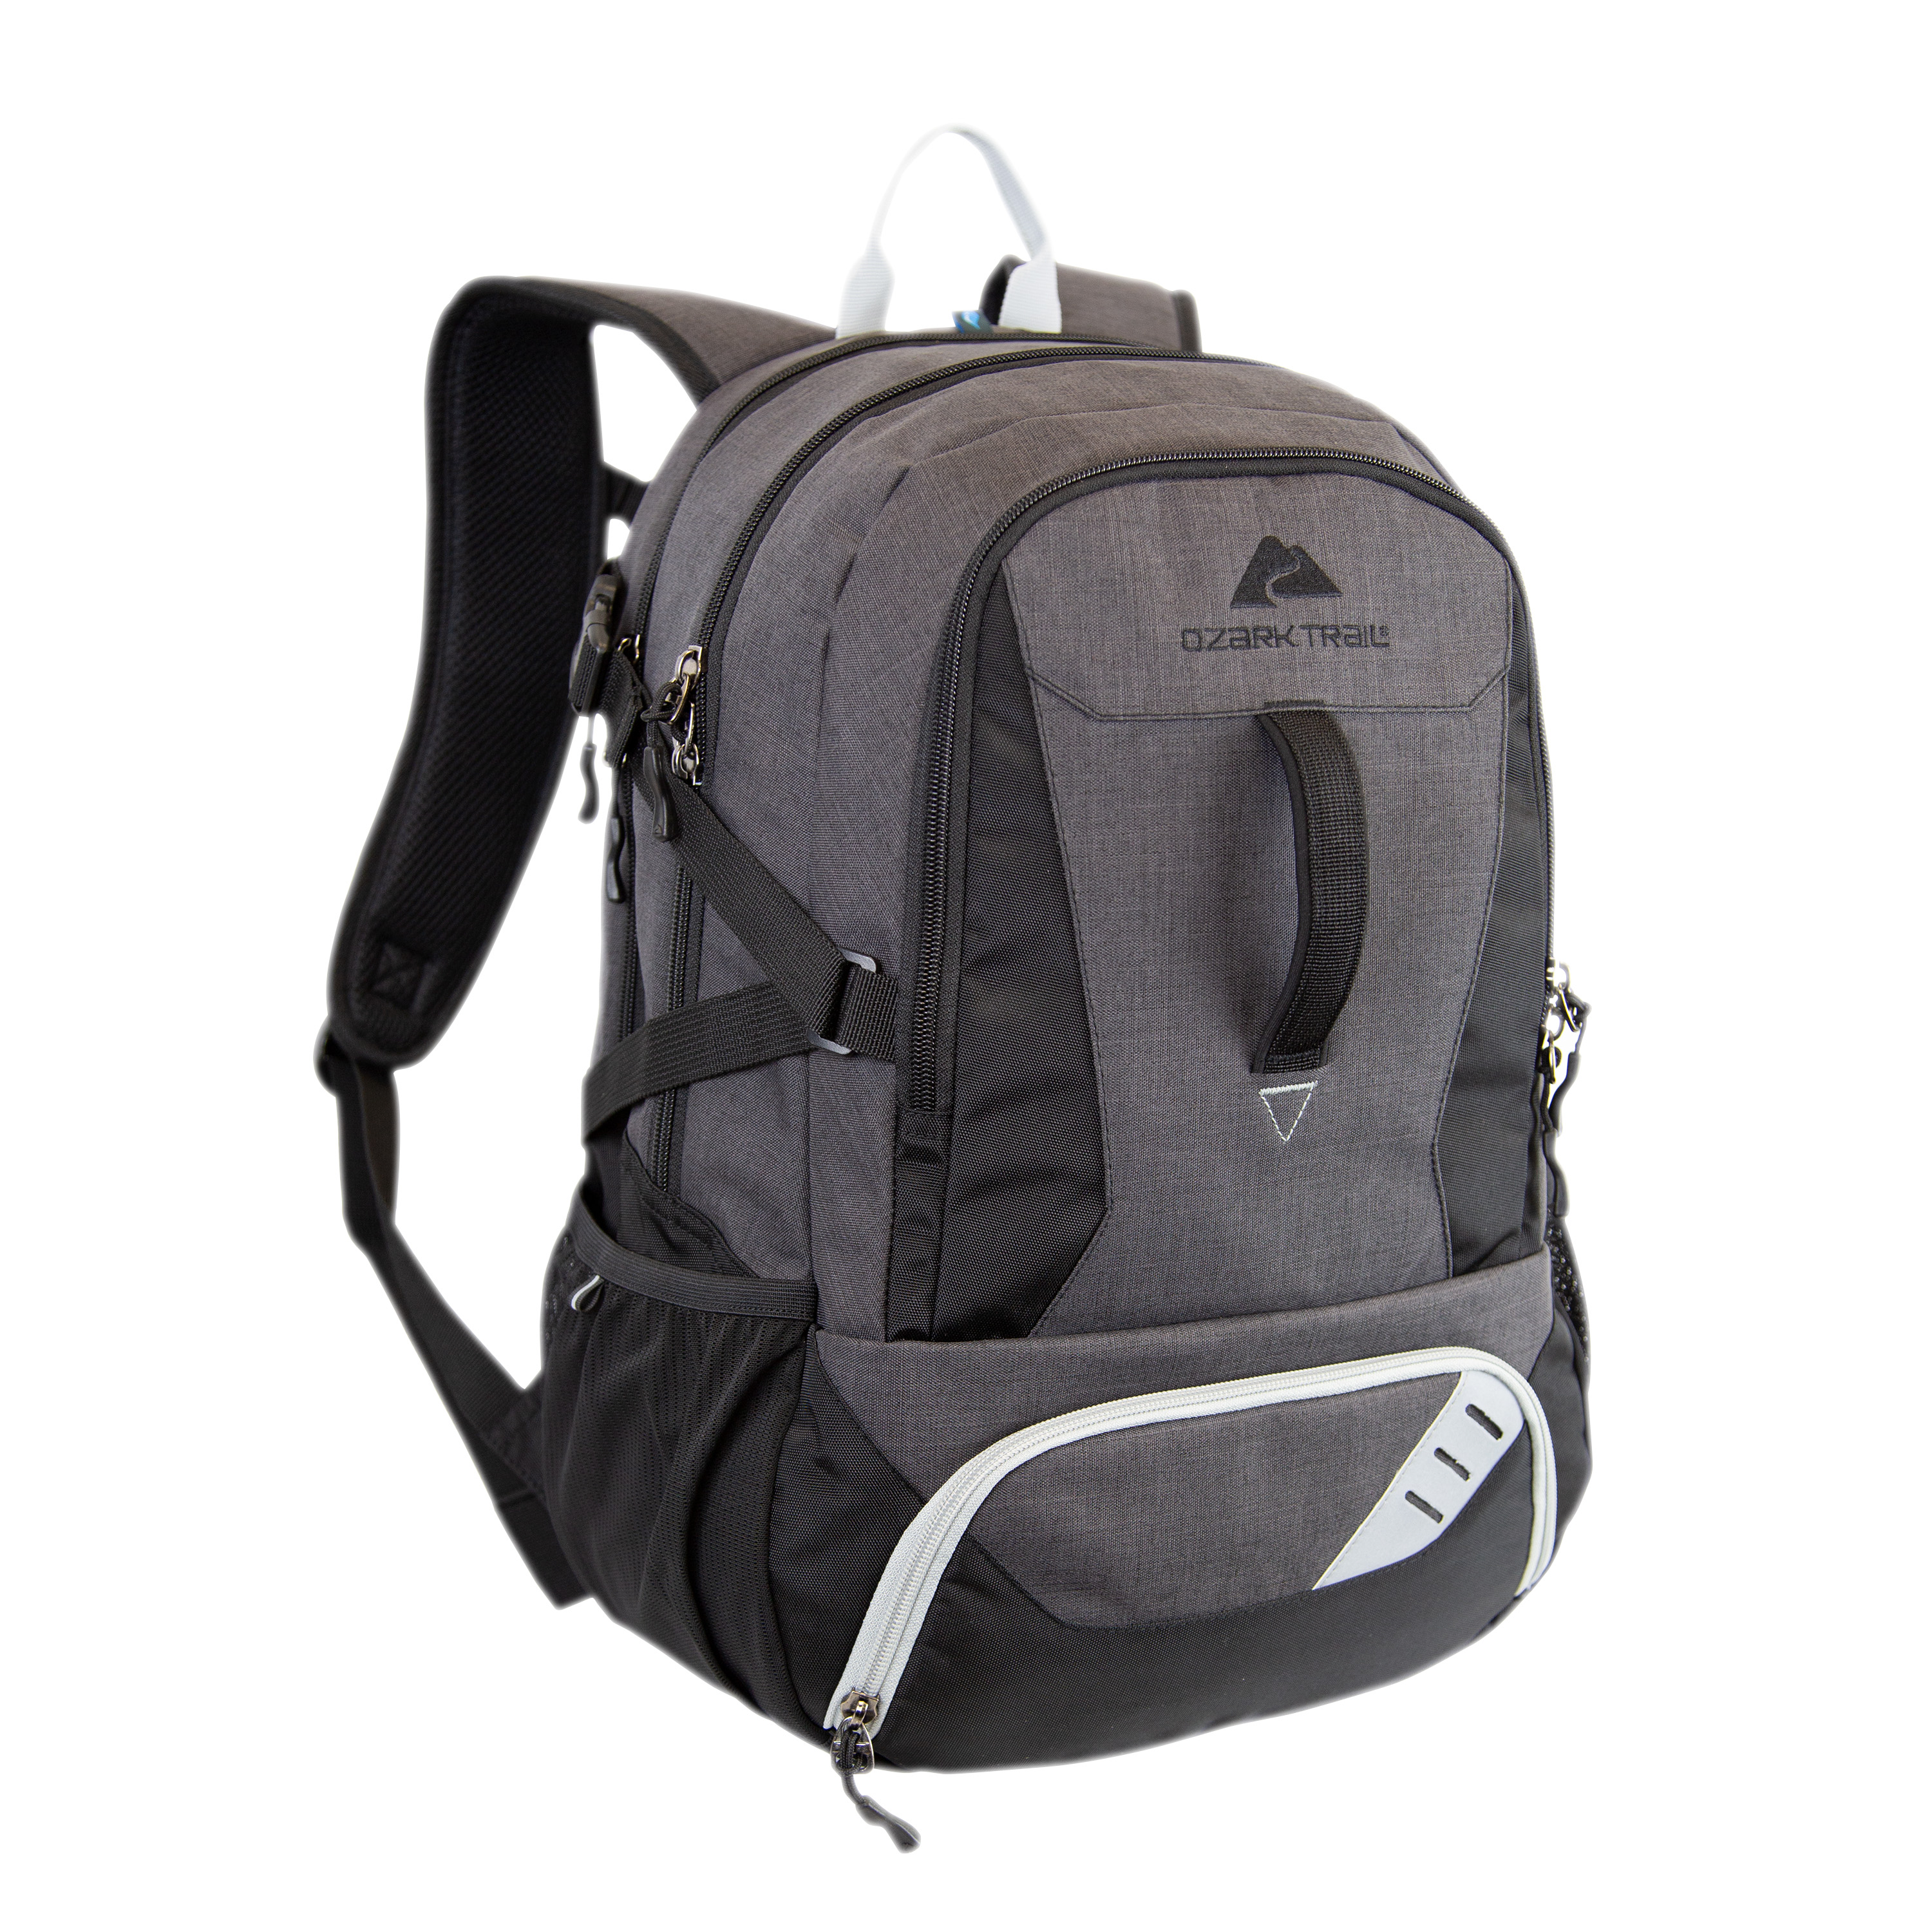 Ozark Trail Shiloh Multi Compartment 35L Backpack with Insulated Cooler Compartment, Solid Pattern - image 1 of 10